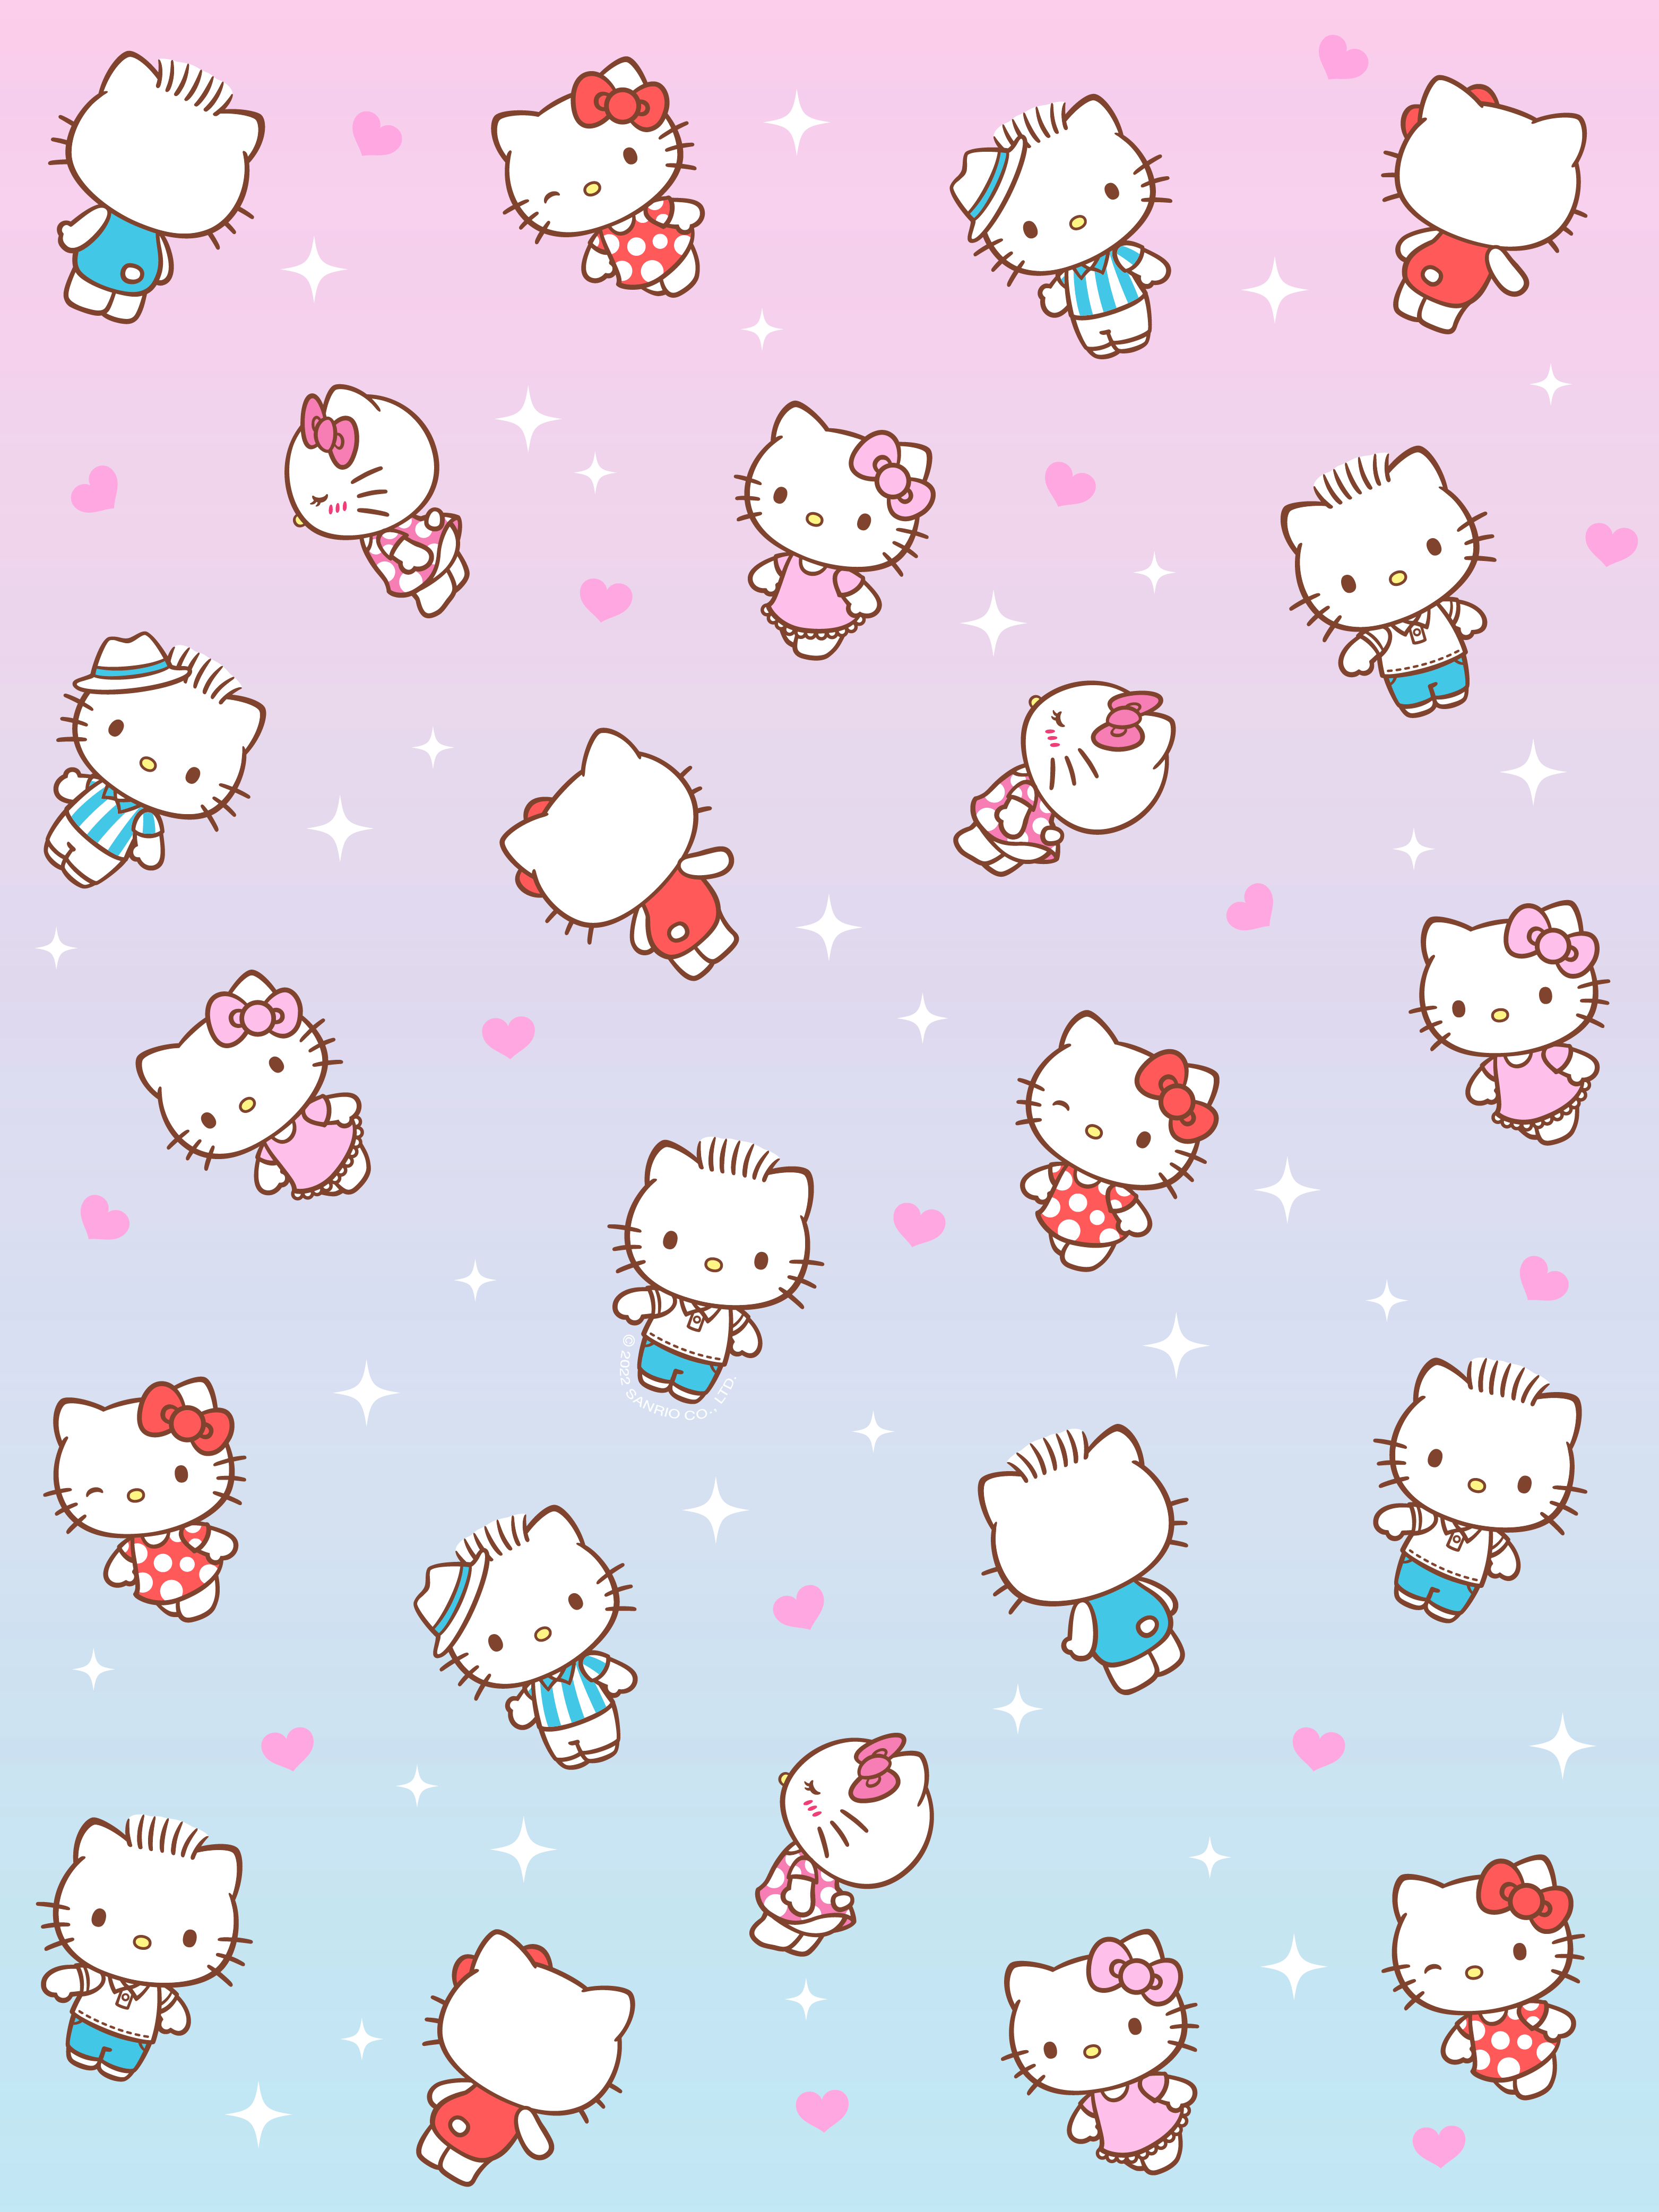 Hello Kitty wallpaper for iPhone and Android! You can download it - Sanrio